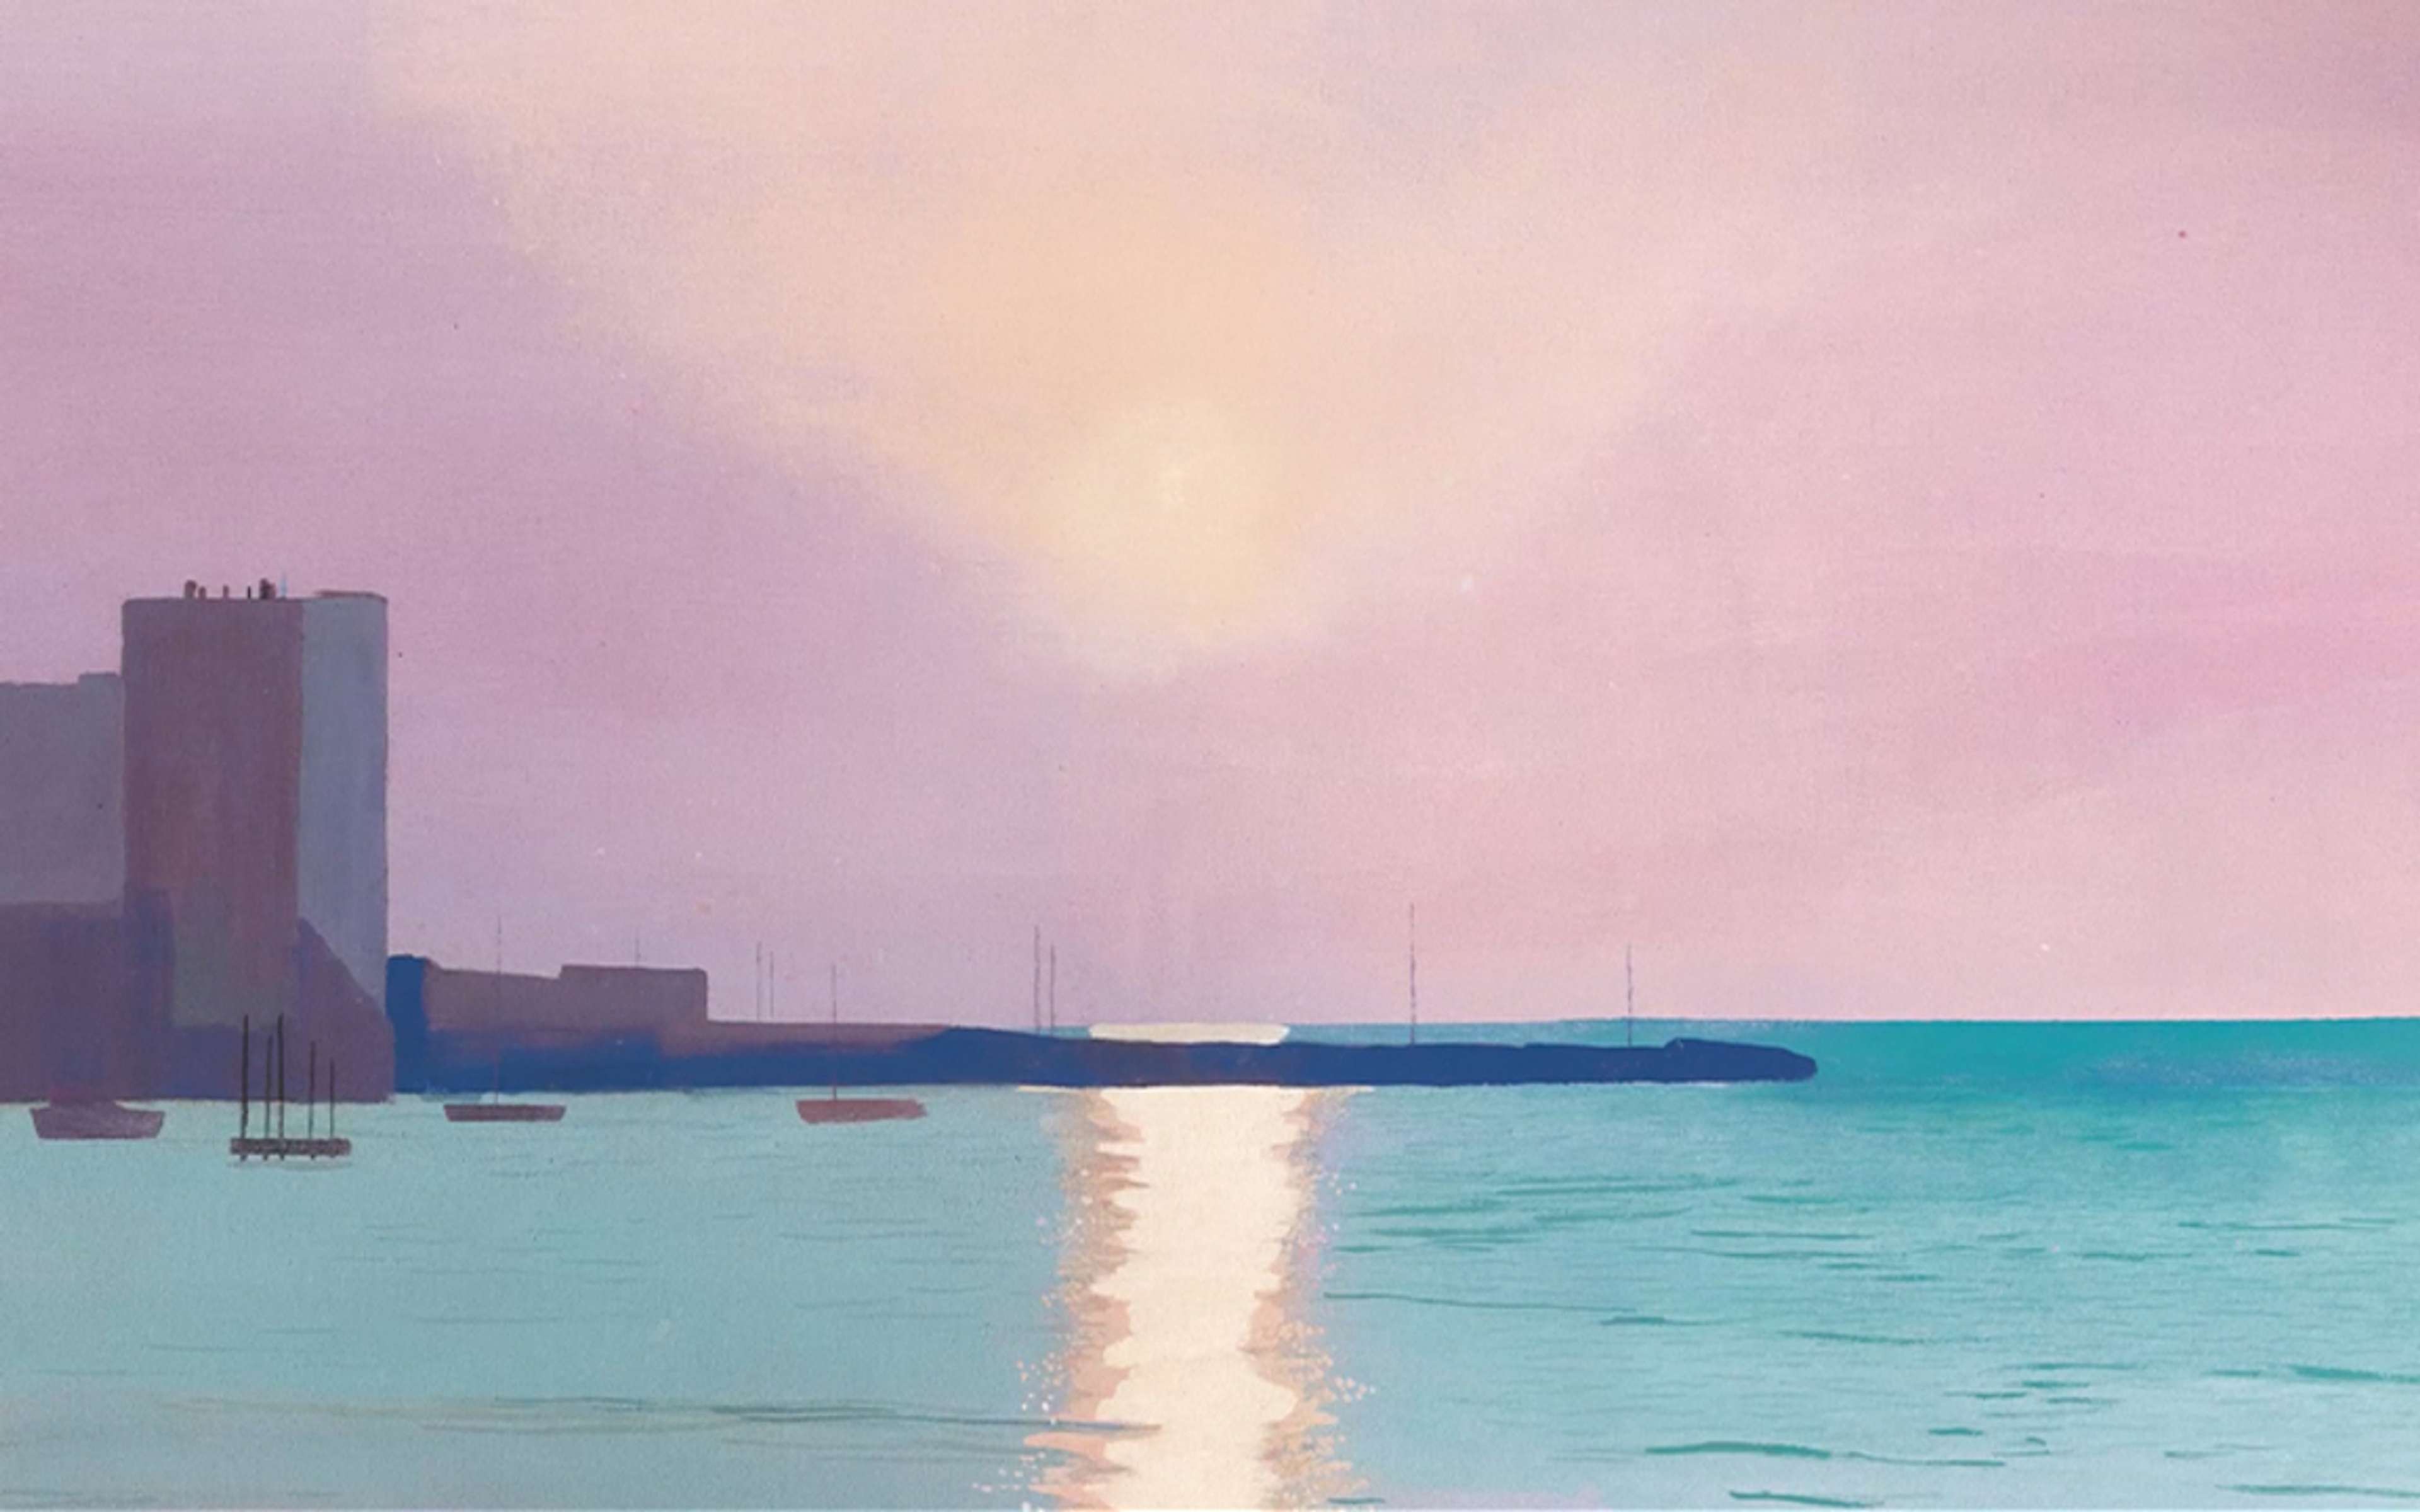 David Hockney’s Early Morning, Sainte-Maxime. An acrylic painting of an early morning seaside view with hues of purple, blue, and pink.